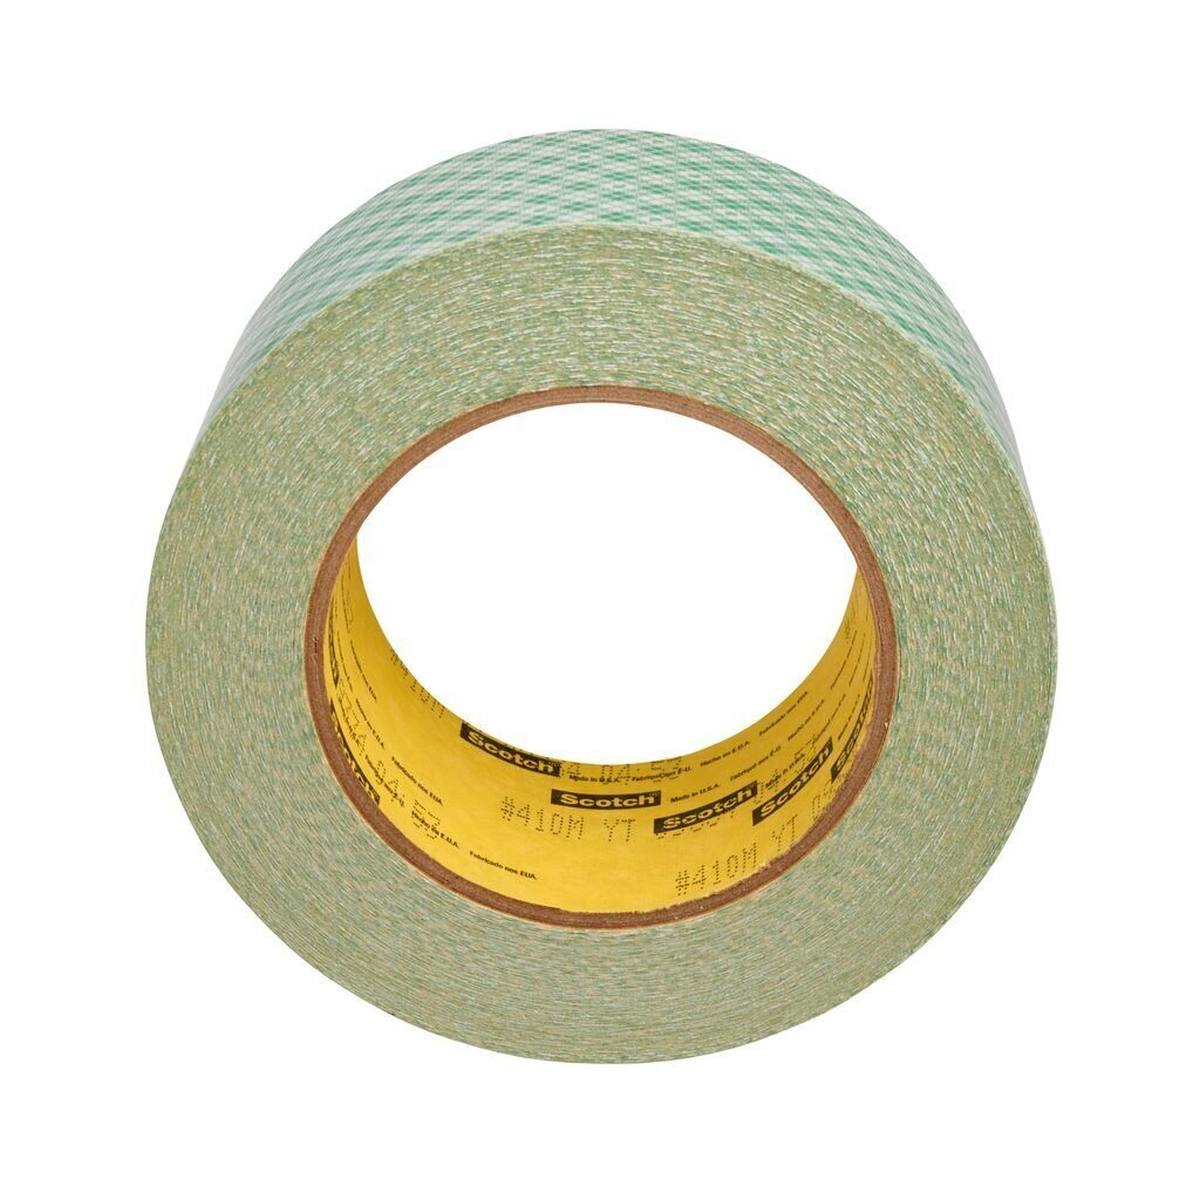 3M Double-sided adhesive tape with non-woven paper backing 410M, white, 50 mm x 33 m, 0.13 mm